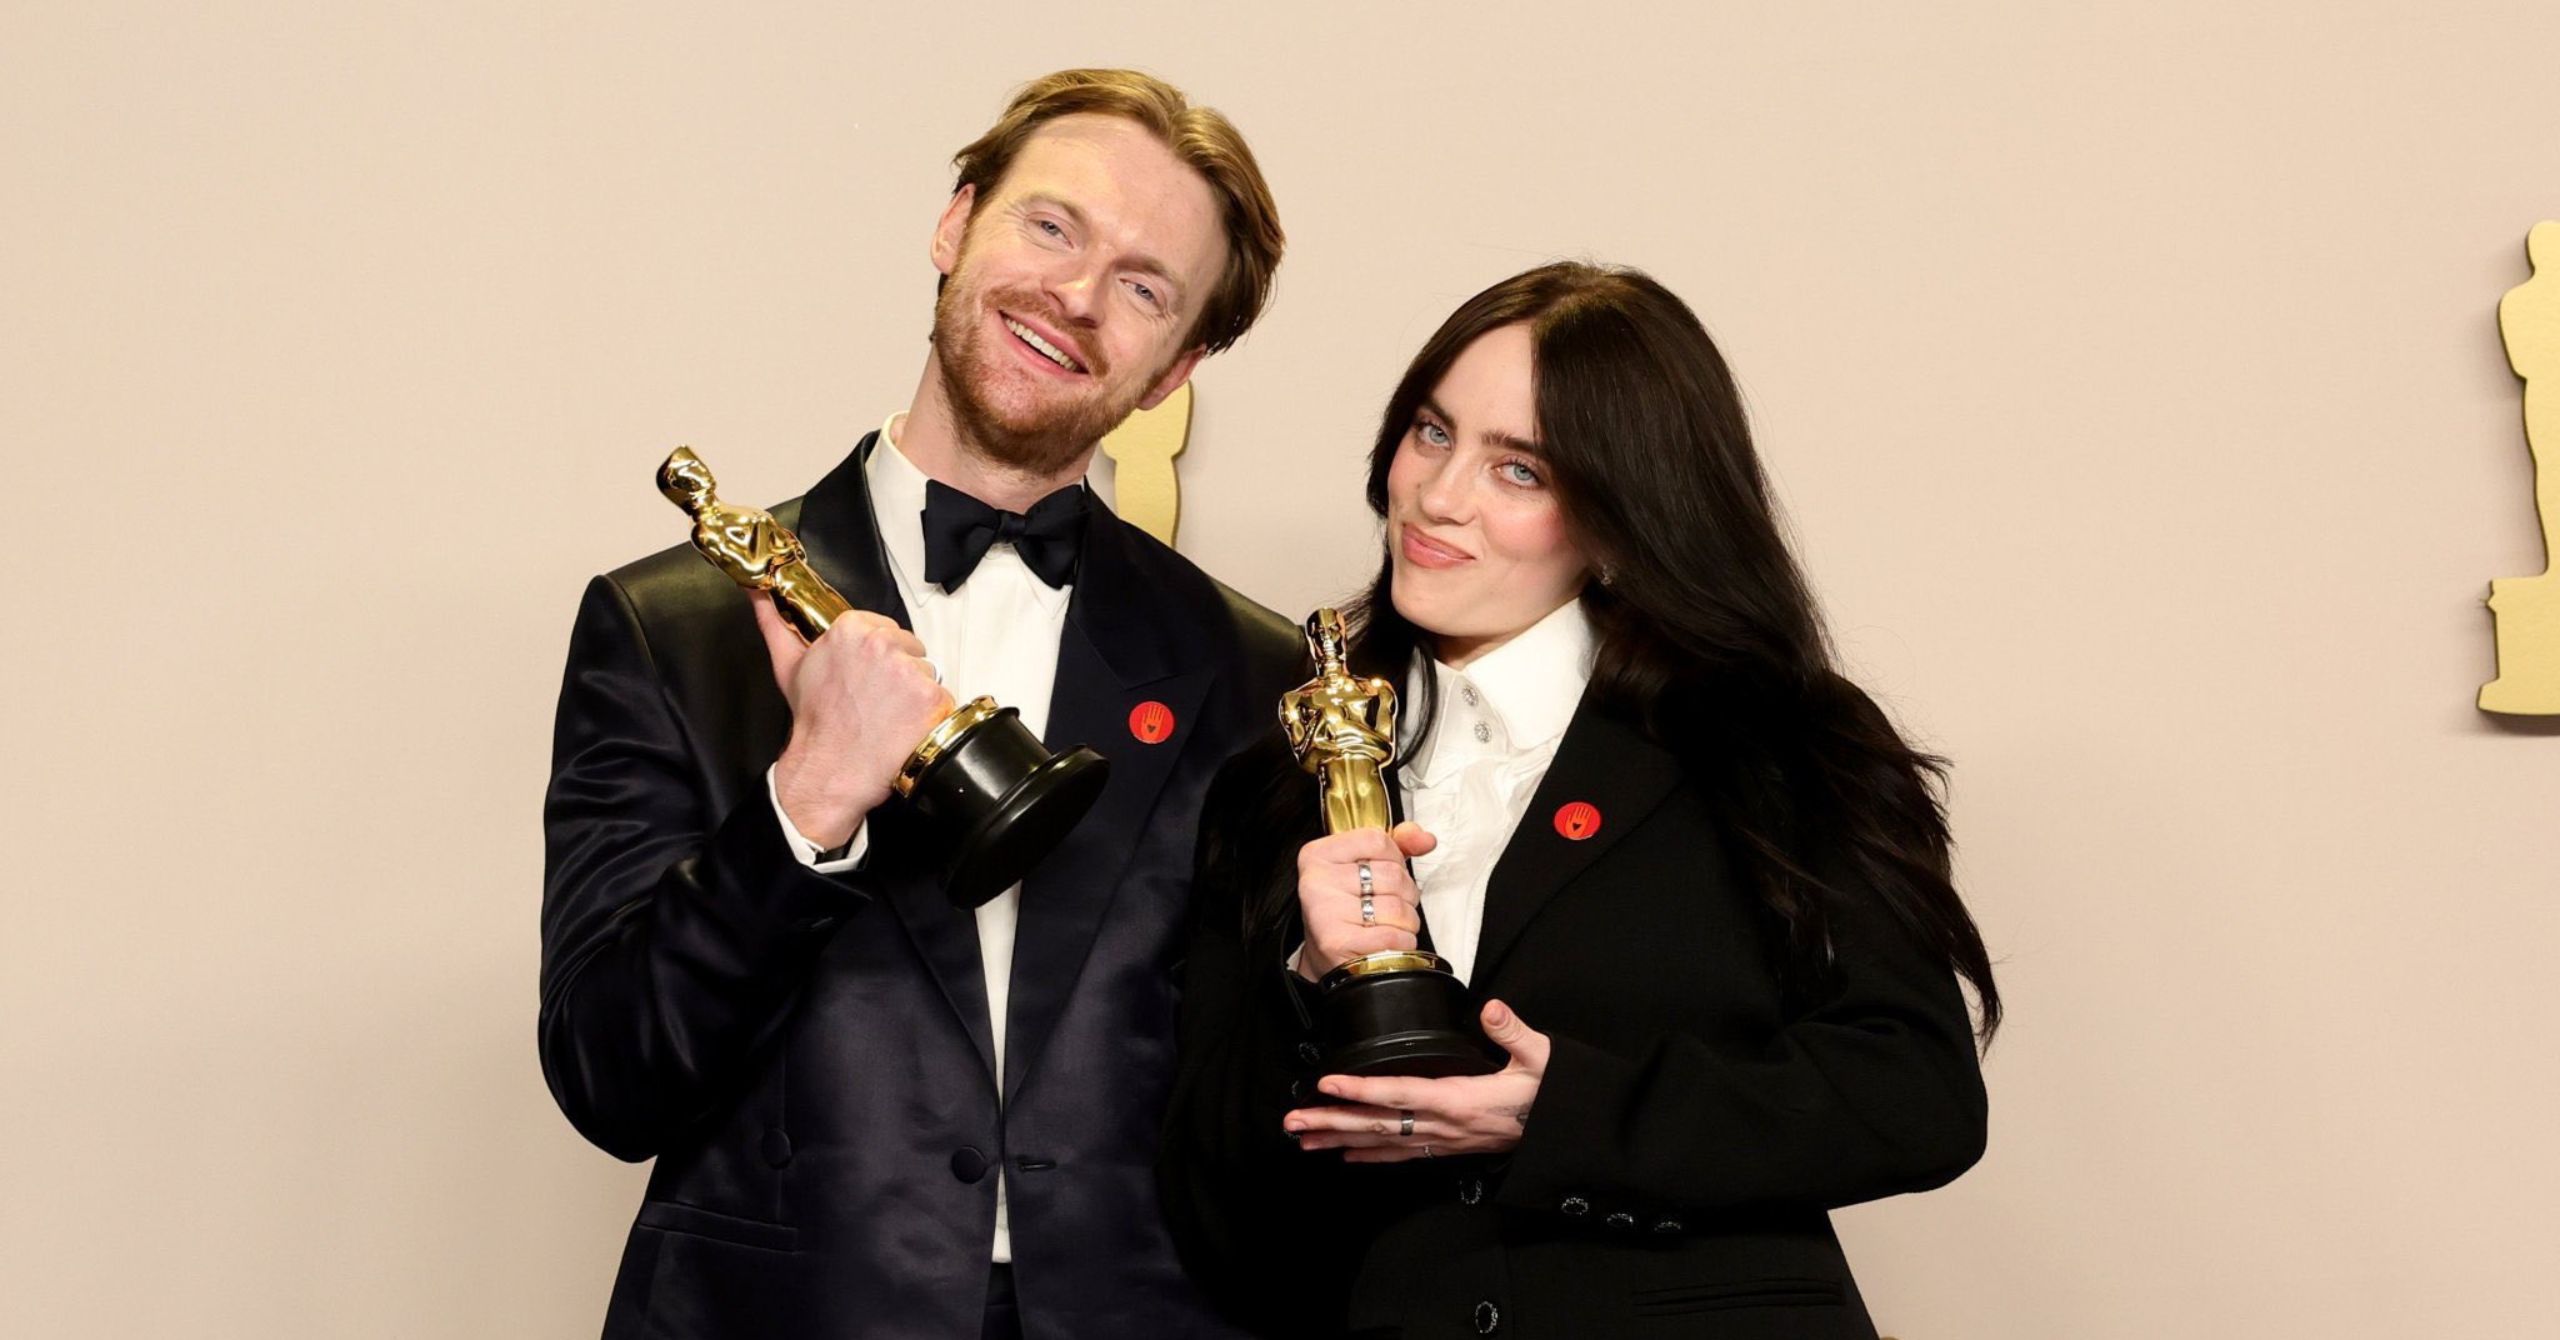 Billie Eilish & Finneas Win Oscar For "What Was I Made For?"